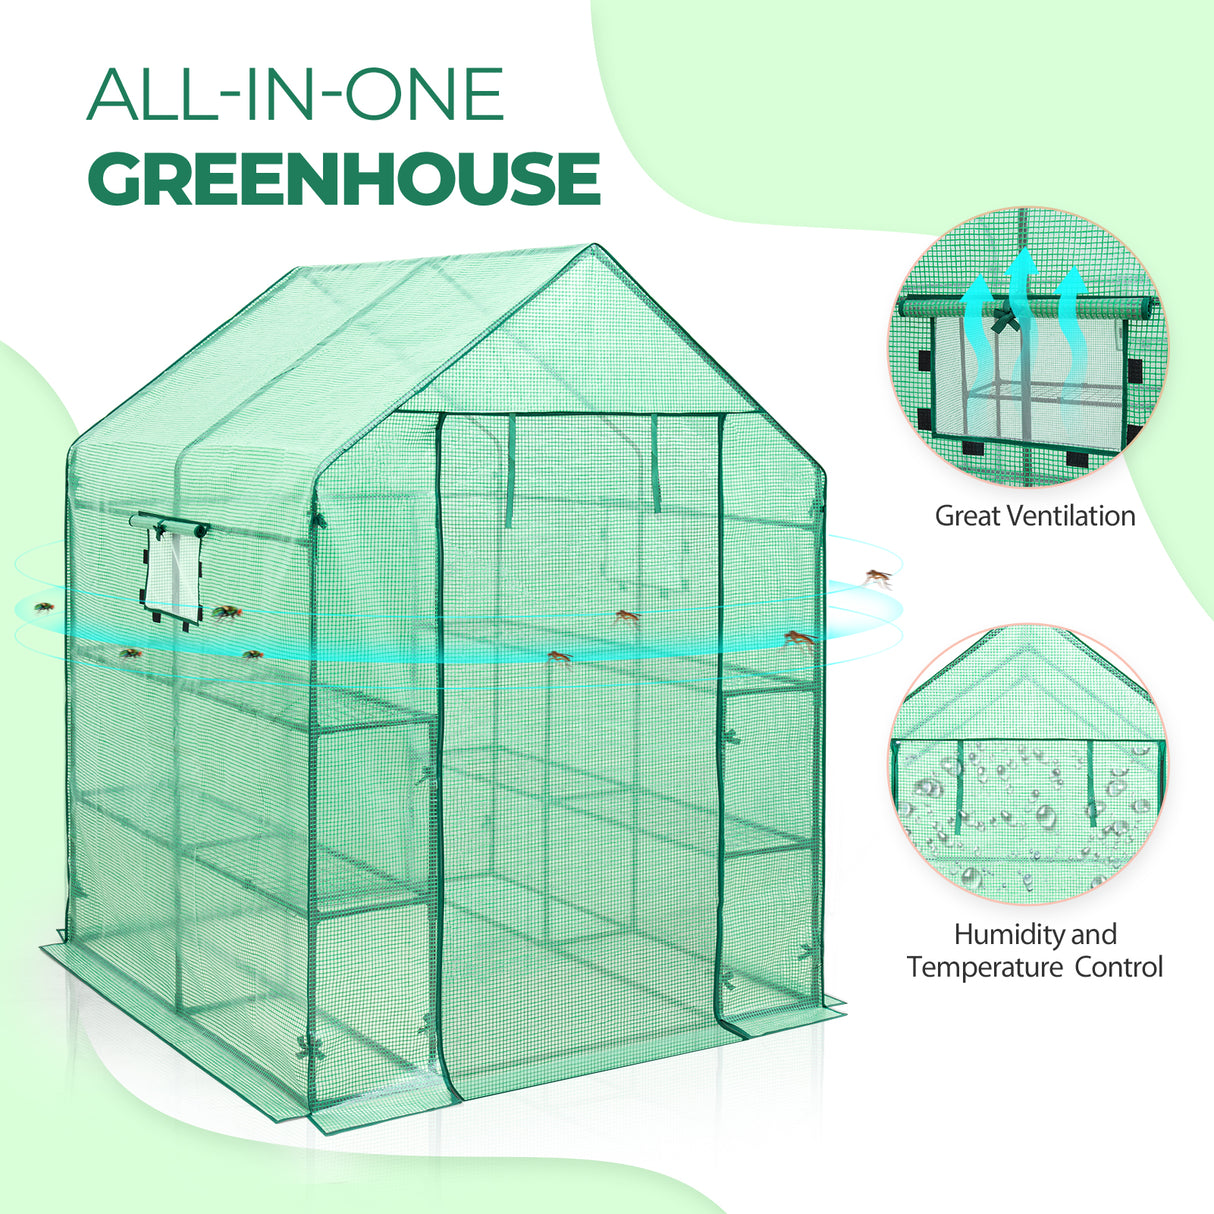 EAGLE PEAK Mini Walk-in Greenhouse 2 Tiers 8 Shelves with Roll-up Zipper Door and 2 Side Mesh Windows, Outdoor Indoor Portable Gardening Plant House 57'' x 57'' x 77'' , Green